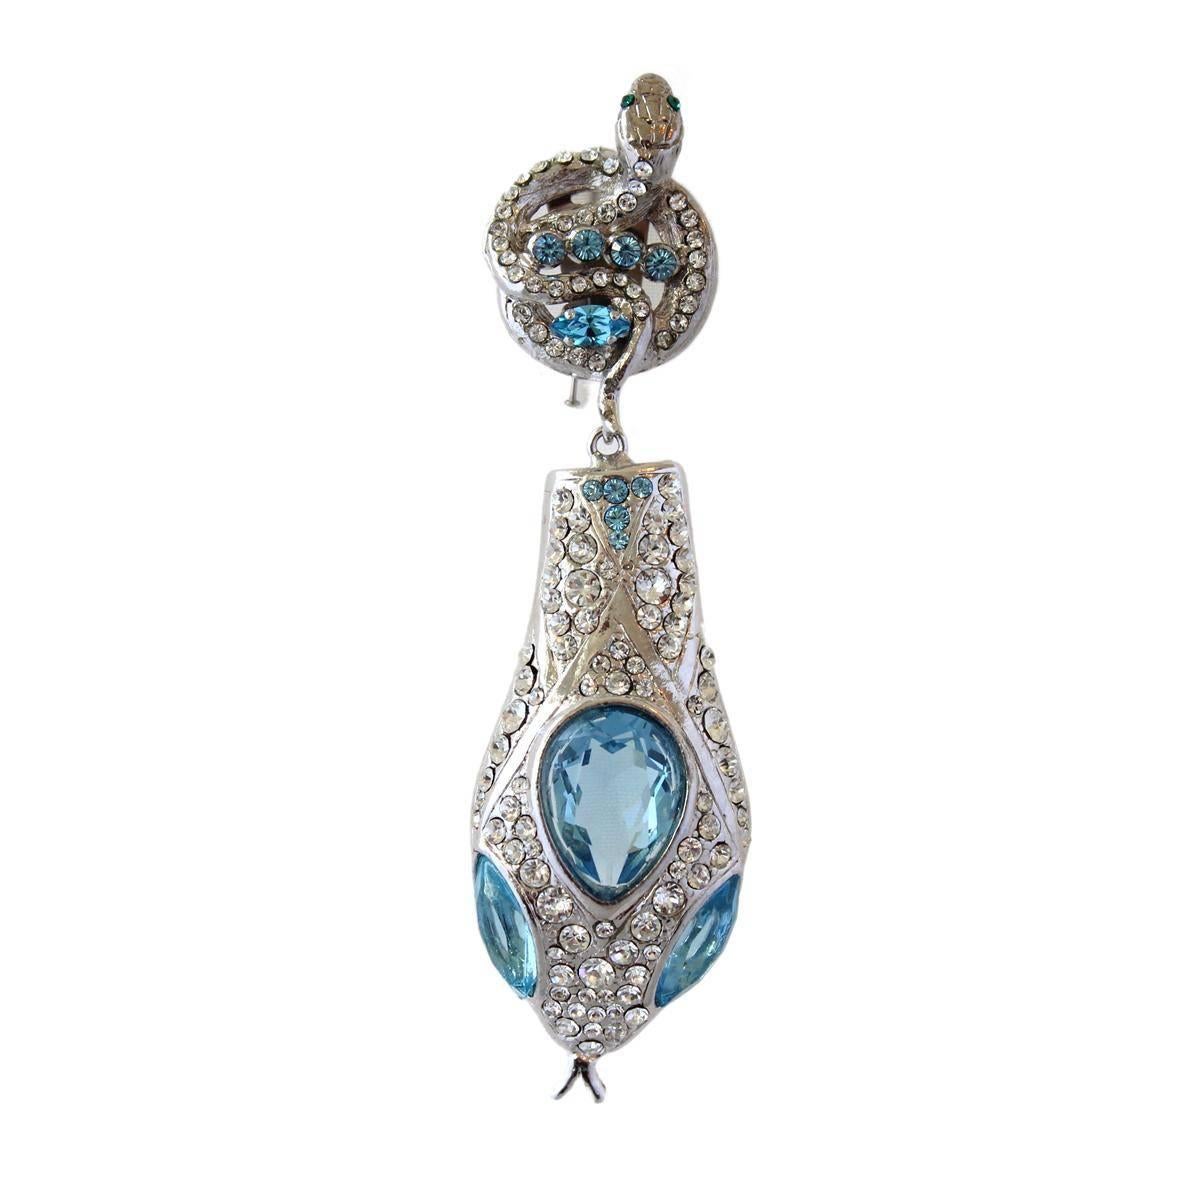 Stunning and marvelous Carlo Zini bijoux earrings
One of the world's best bijoux designers
Amazing animalier earrings
Class A swarovski crystals
Aqua like crystals
Non allergenci rhodium
100% Artisanal work
Made in Milan
Worldwide express shipping